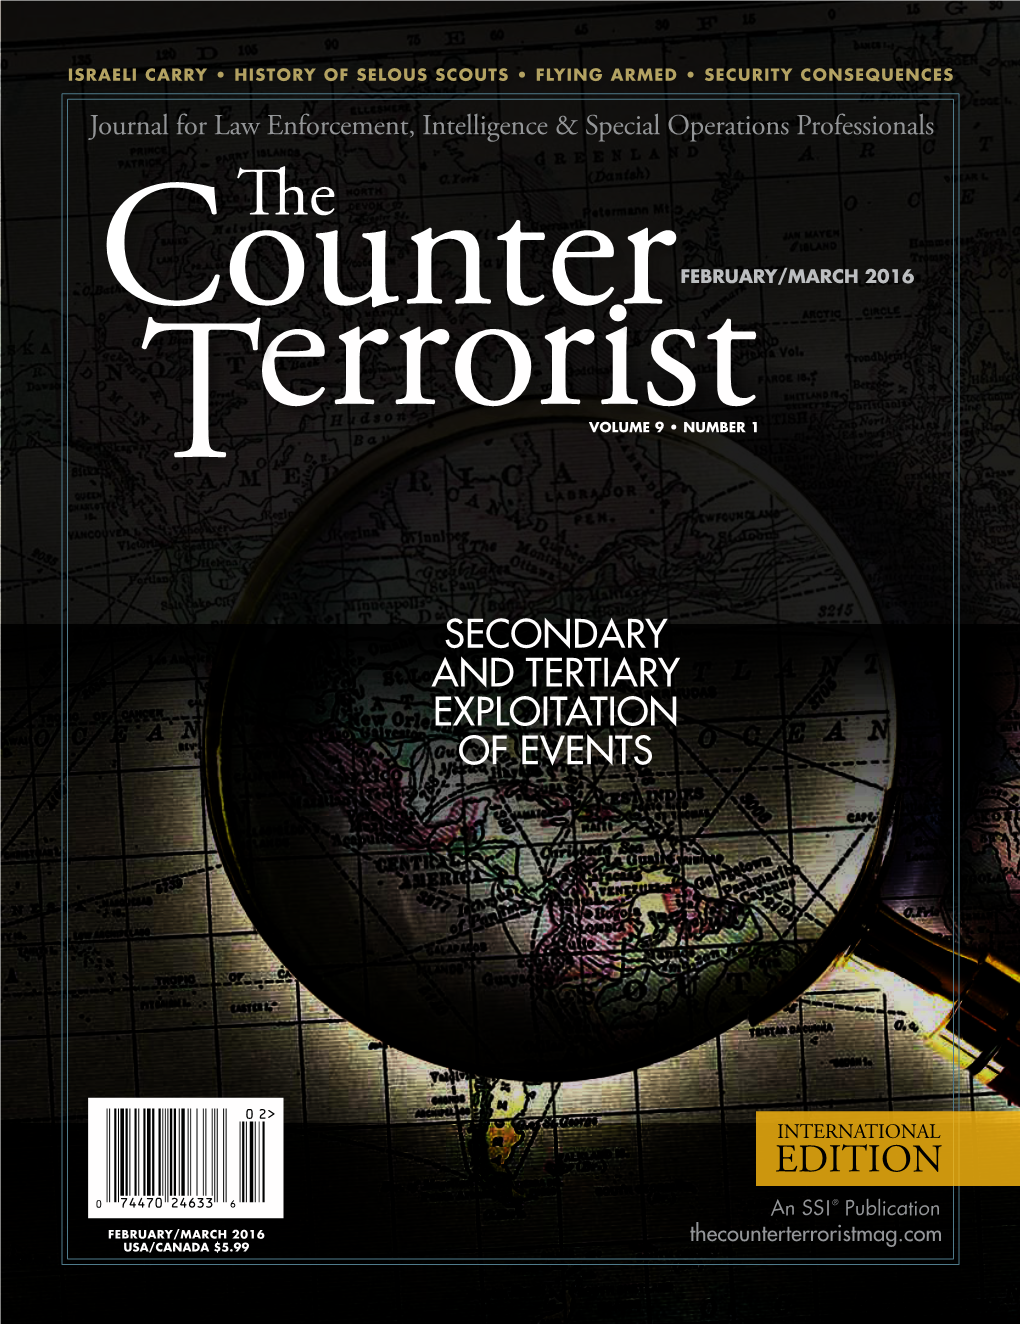 EDITION an SSI ® Publication FEBRUARY/MARCH 2016 Thecounterterroristmag.Com USA/CANADA $5.99 LEGEND REFINED M 1 07A1